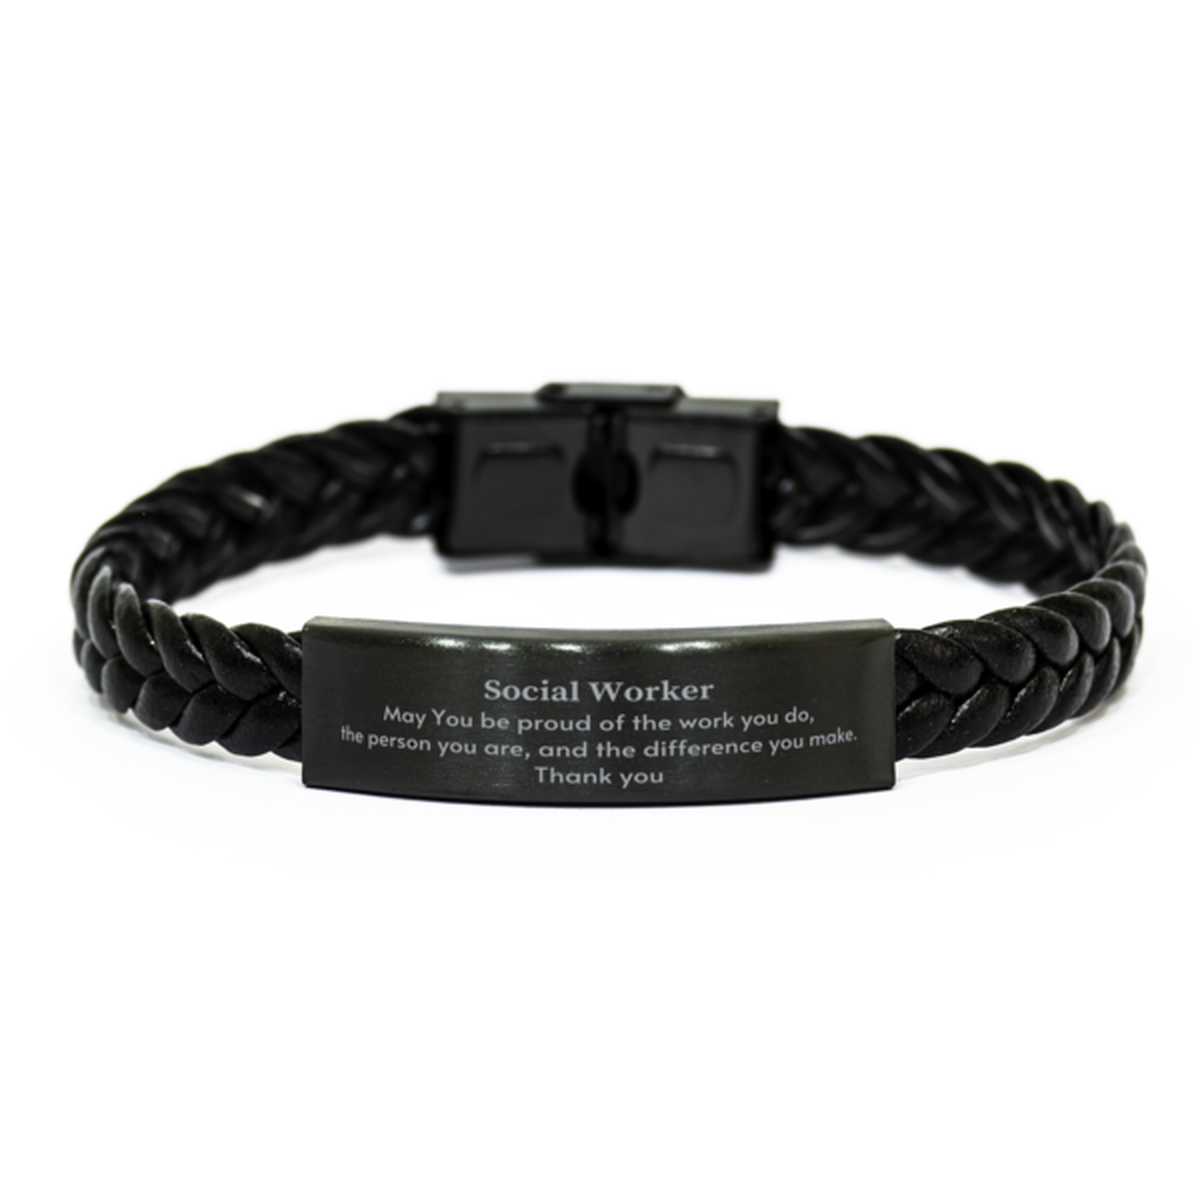 Heartwarming Braided Leather Bracelet Retirement Coworkers Gifts for Social Worker, Social Worker May You be proud of the work you do, the person you are Gifts for Boss Men Women Friends